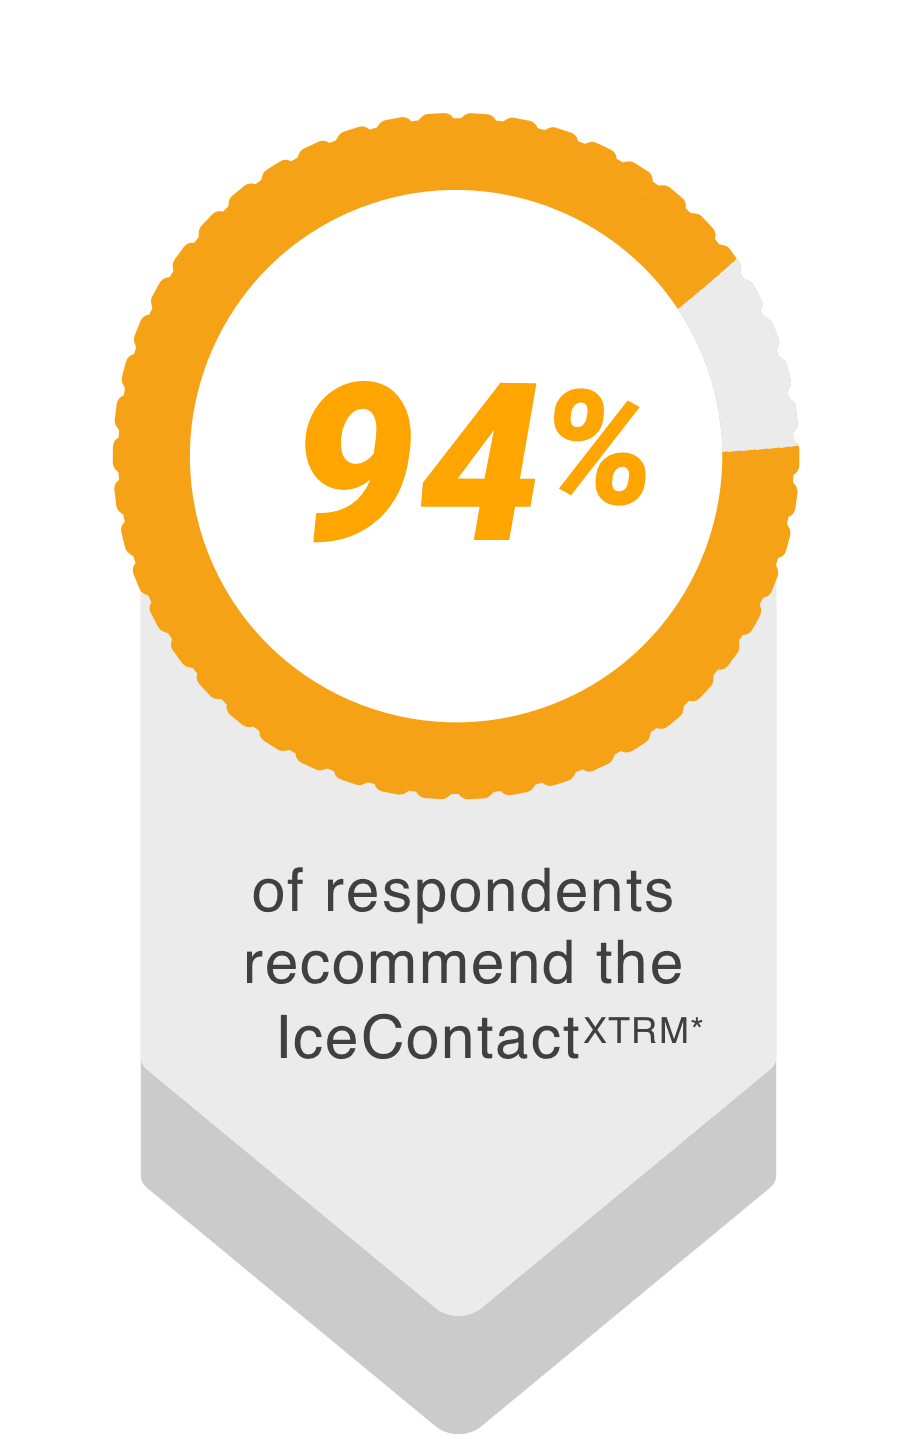 94% recommend the IceContact XTRM by Continental Tires